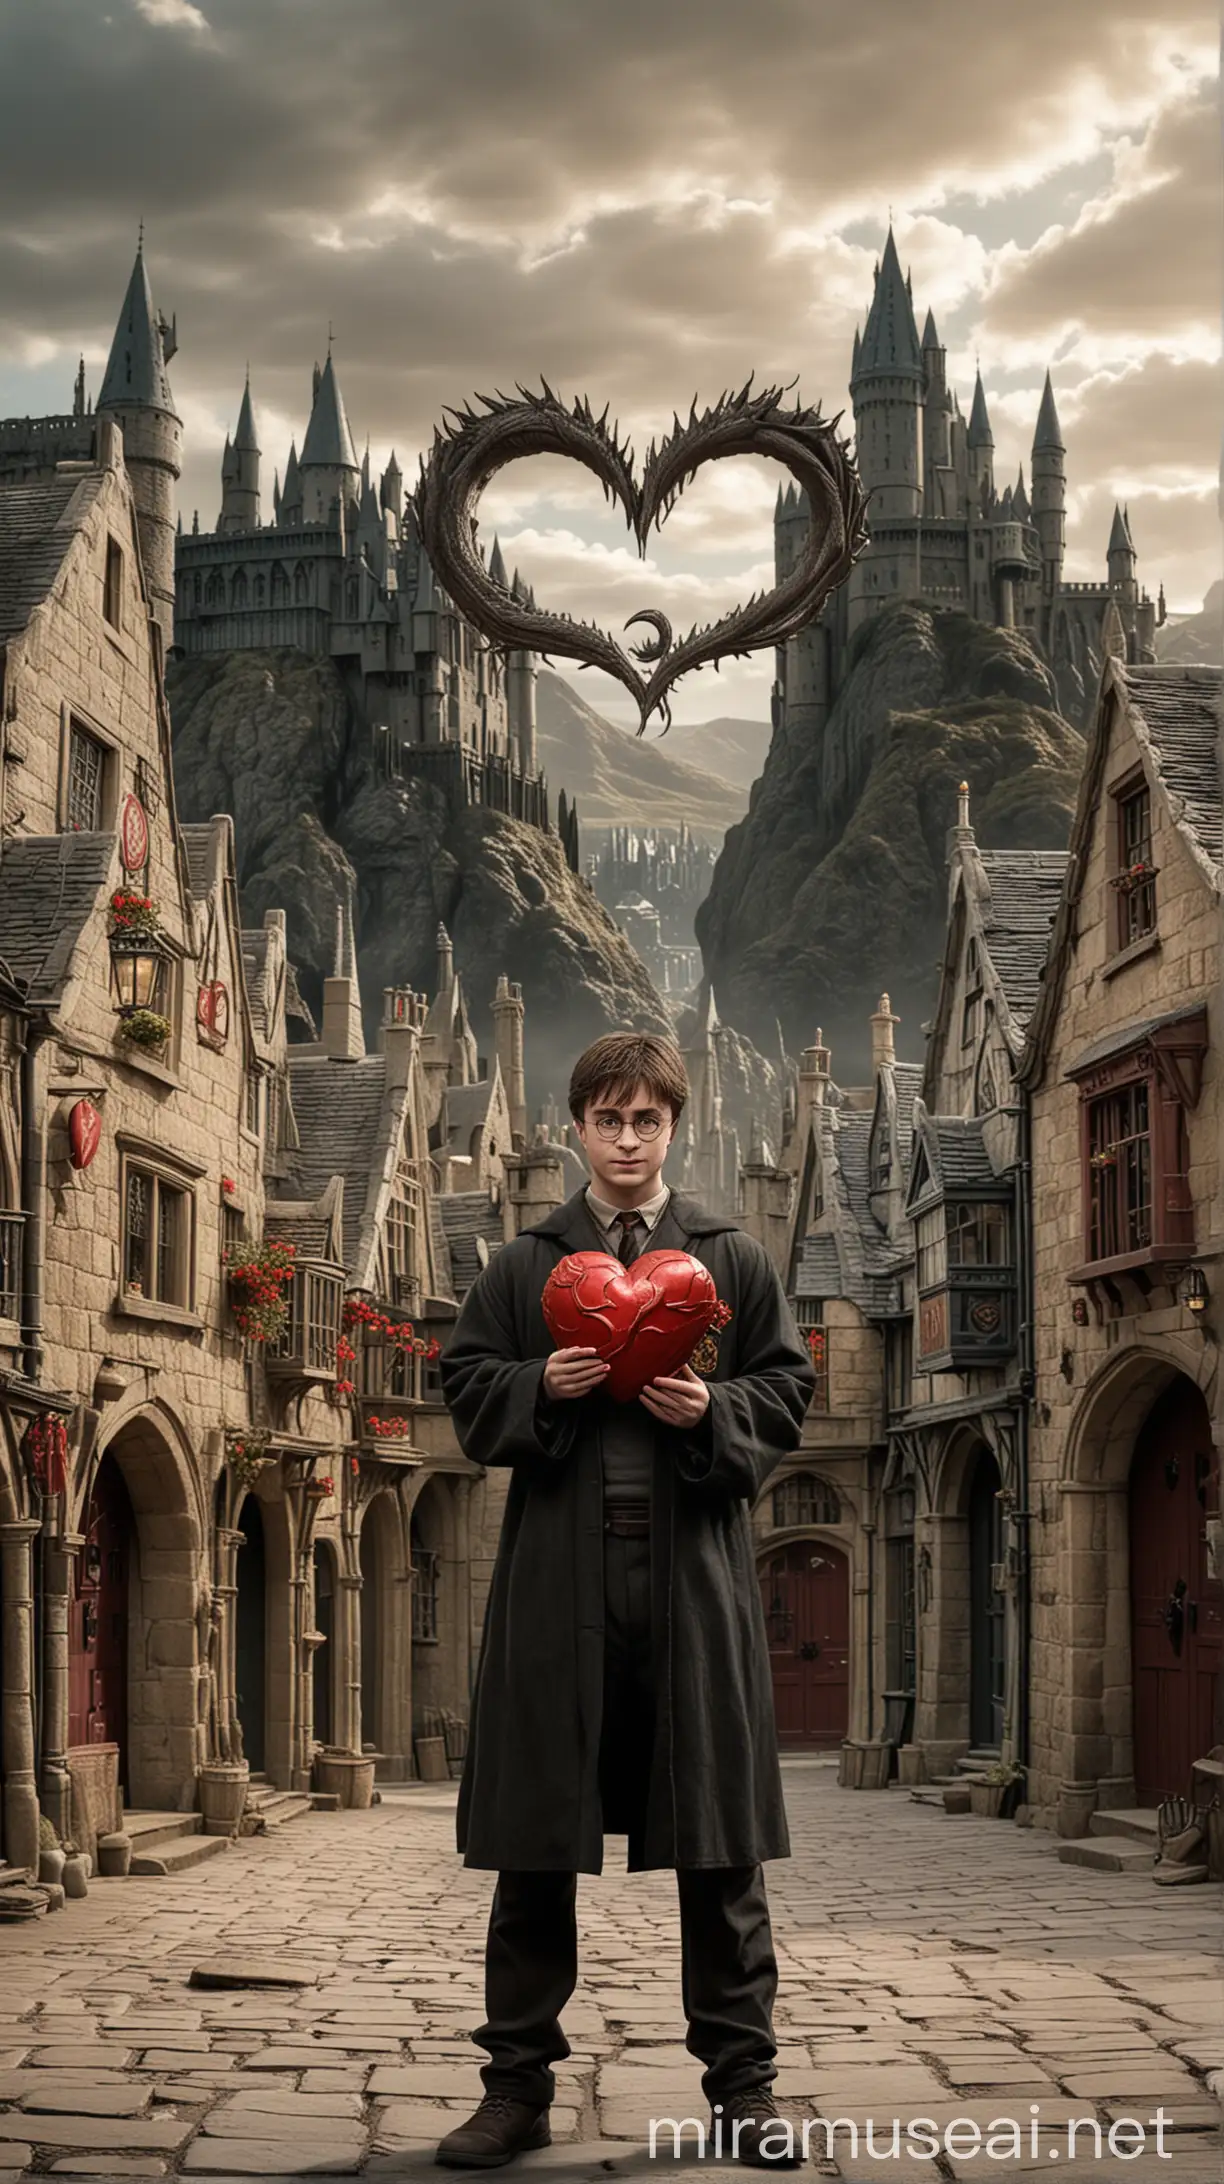 harry potter holding a heart against the backdrop of a Game of Thrones location with elements of House of the Dragon